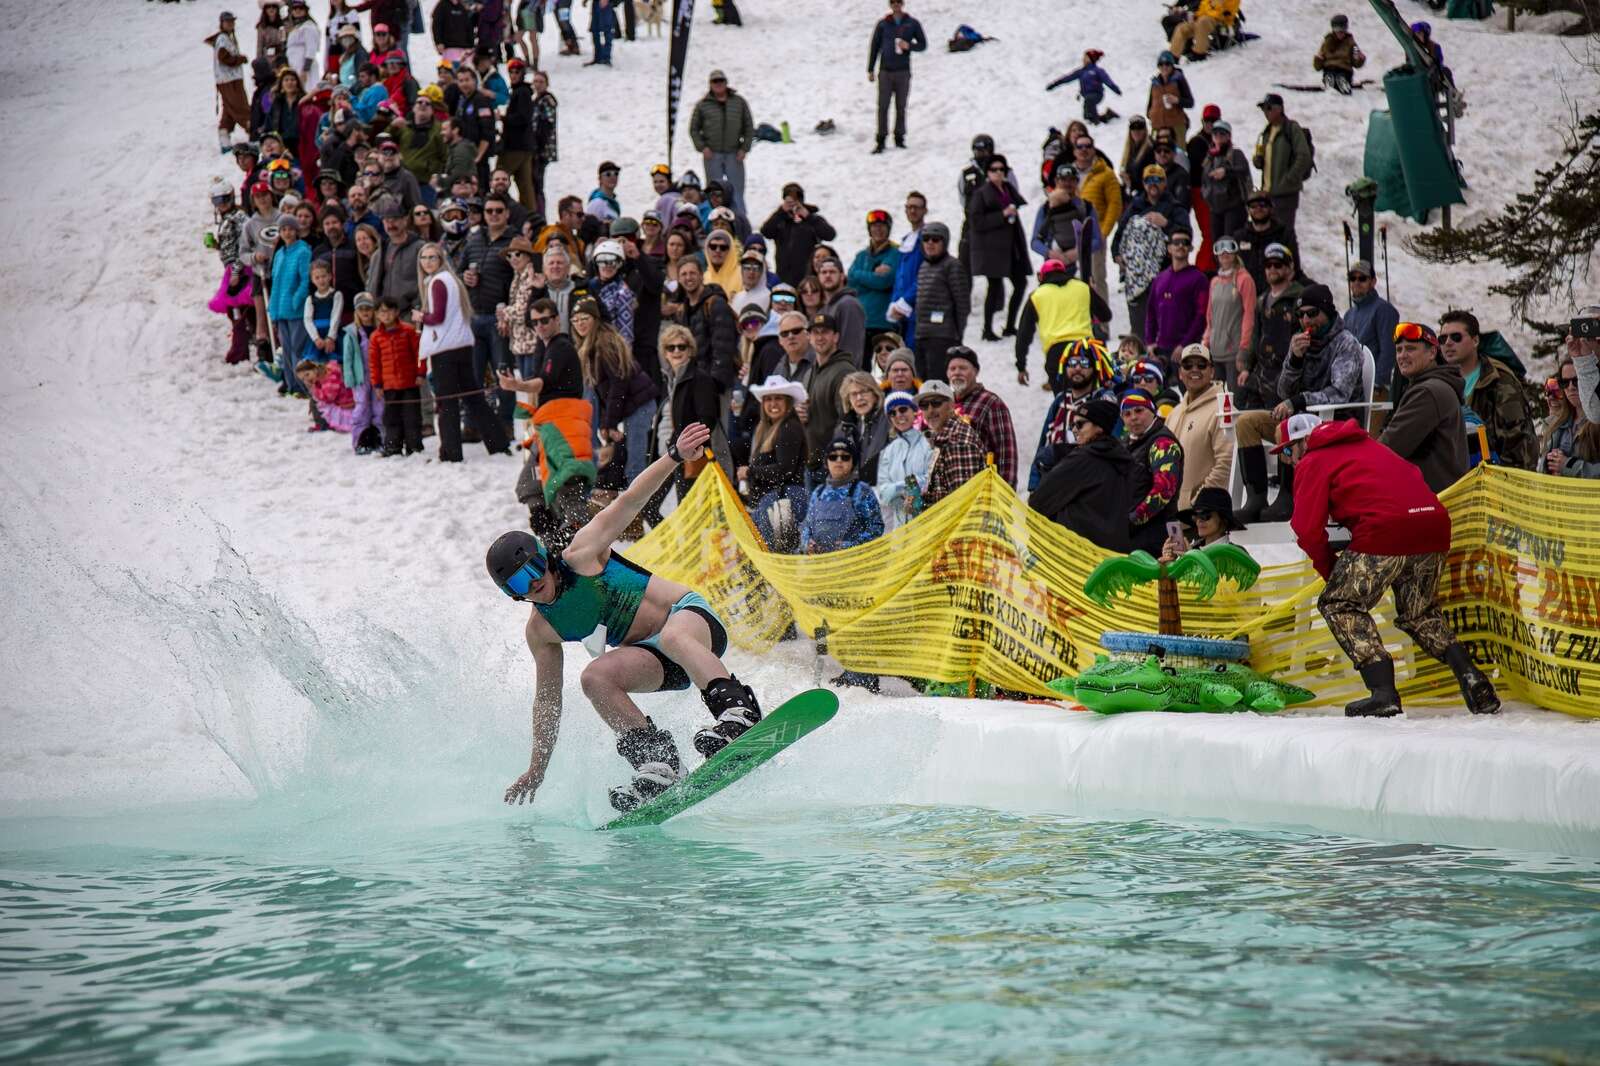 Some make it, others don’t in Purgatory Resort’s annual pond skimming ...